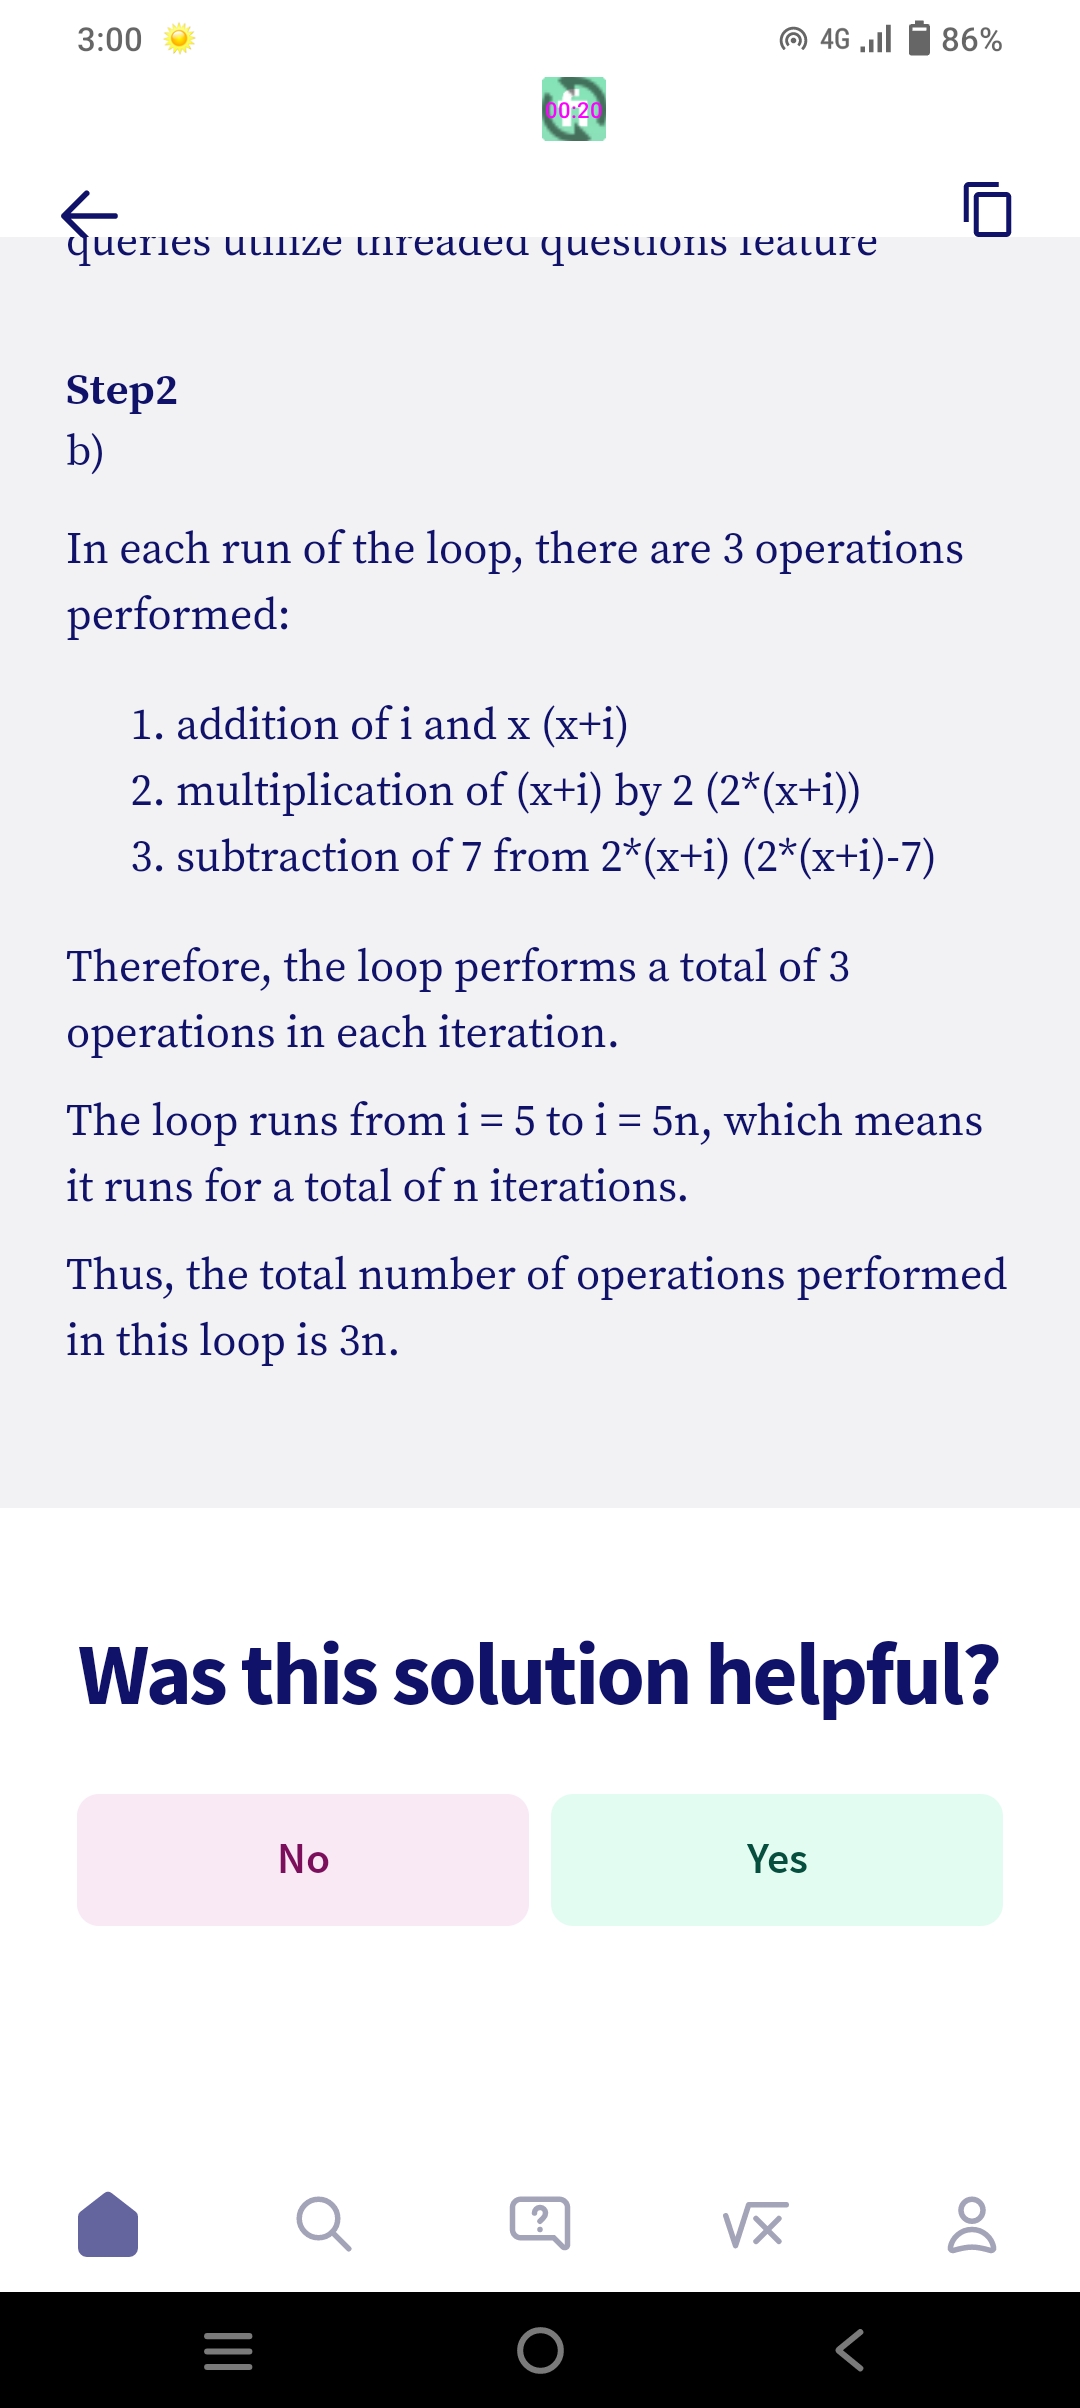 3:00
Step2
b)
que
queries uulize unreaded questions Teature
00:20
In each run of the loop, there are 3 operations
performed:
1. addition of i and x (x+i)
2. multiplication of (x+i) by 2 (2*(x+i))
3. subtraction of 7 from 2*(x+i) (2*(x+i)-7)
Therefore, the loop performs a total of 3
operations in each iteration.
4G .Il
The loop runs from i = 5 to i = 5n, which means
it runs for a total of n iterations.
|||
Thus, the total number of operations performed
in this loop is 3n.
=
Was this solution helpful?
No
86%
Yes
VX
Г
Do